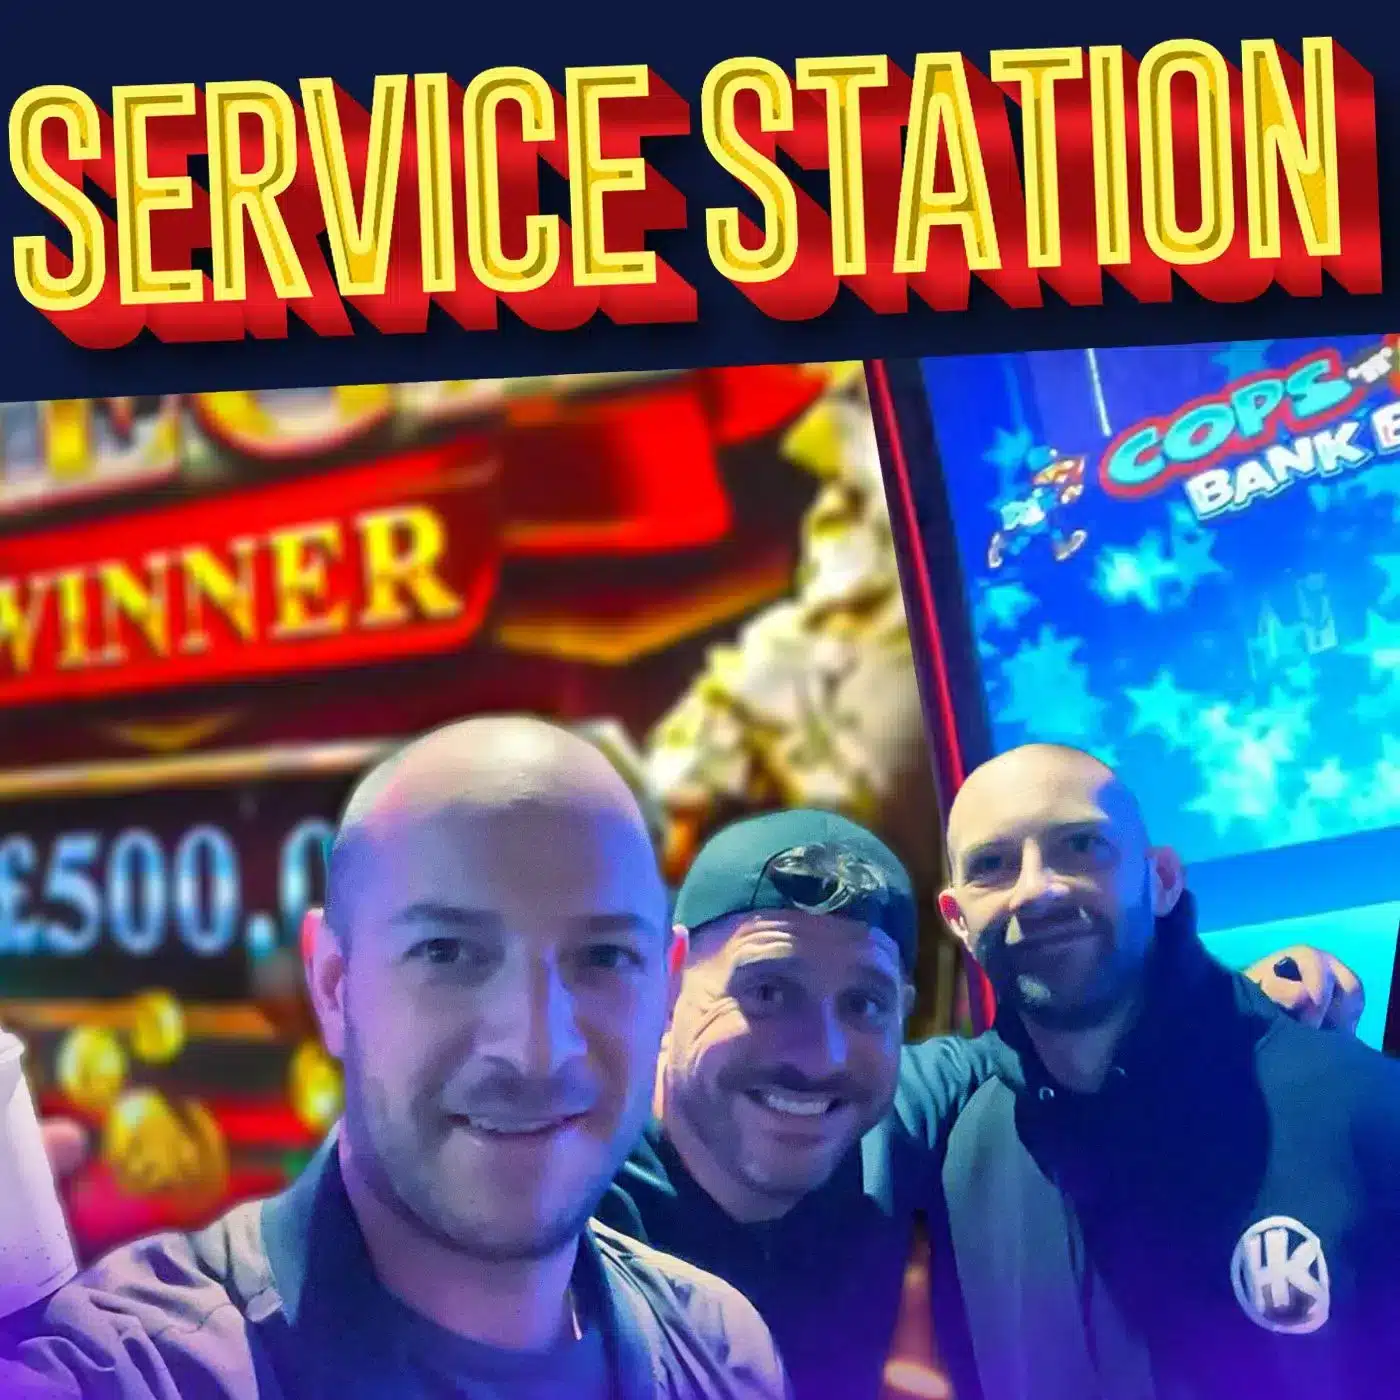 Service Station Live Stream Highlights! Featuring  @HideousSlots ​